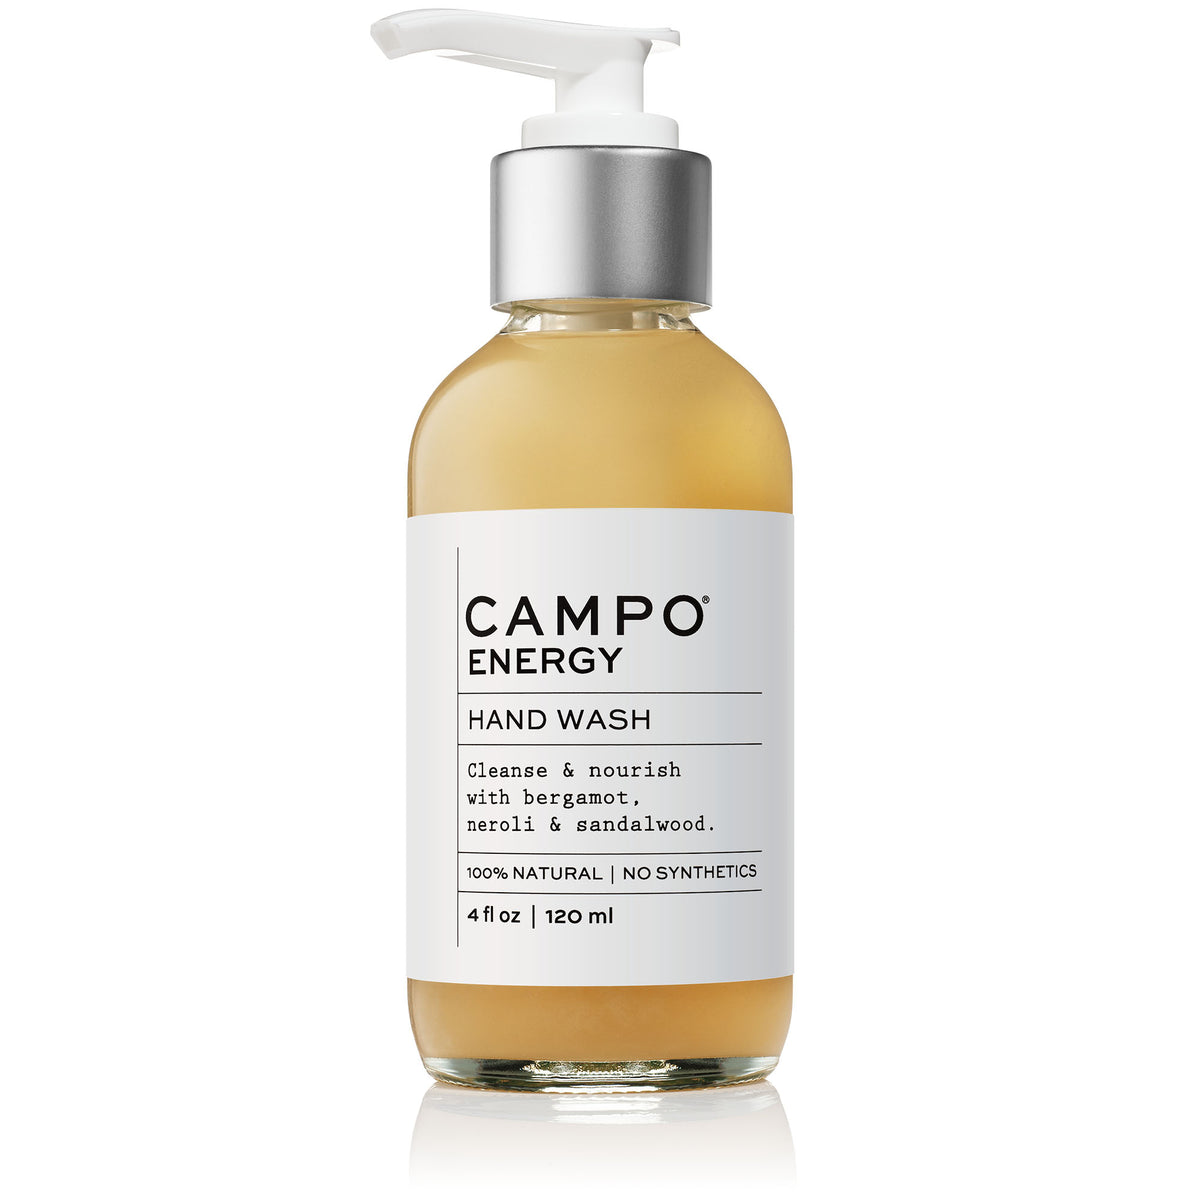 Campo Beauty Essential Oil Hand Wash - ENERGY Blend. Wash away the germs &amp; breathe in aromatherapy with our nourishing ENERGY essential oil hand wash. Stay well with a 100% natural essential oil blend of bergamot, neroli &amp; sandalwood. Transport yourself to nature &amp; transform your mood.  No harsh, dirty ingredients - no synthetic preservatives, detergents, or foaming agents.